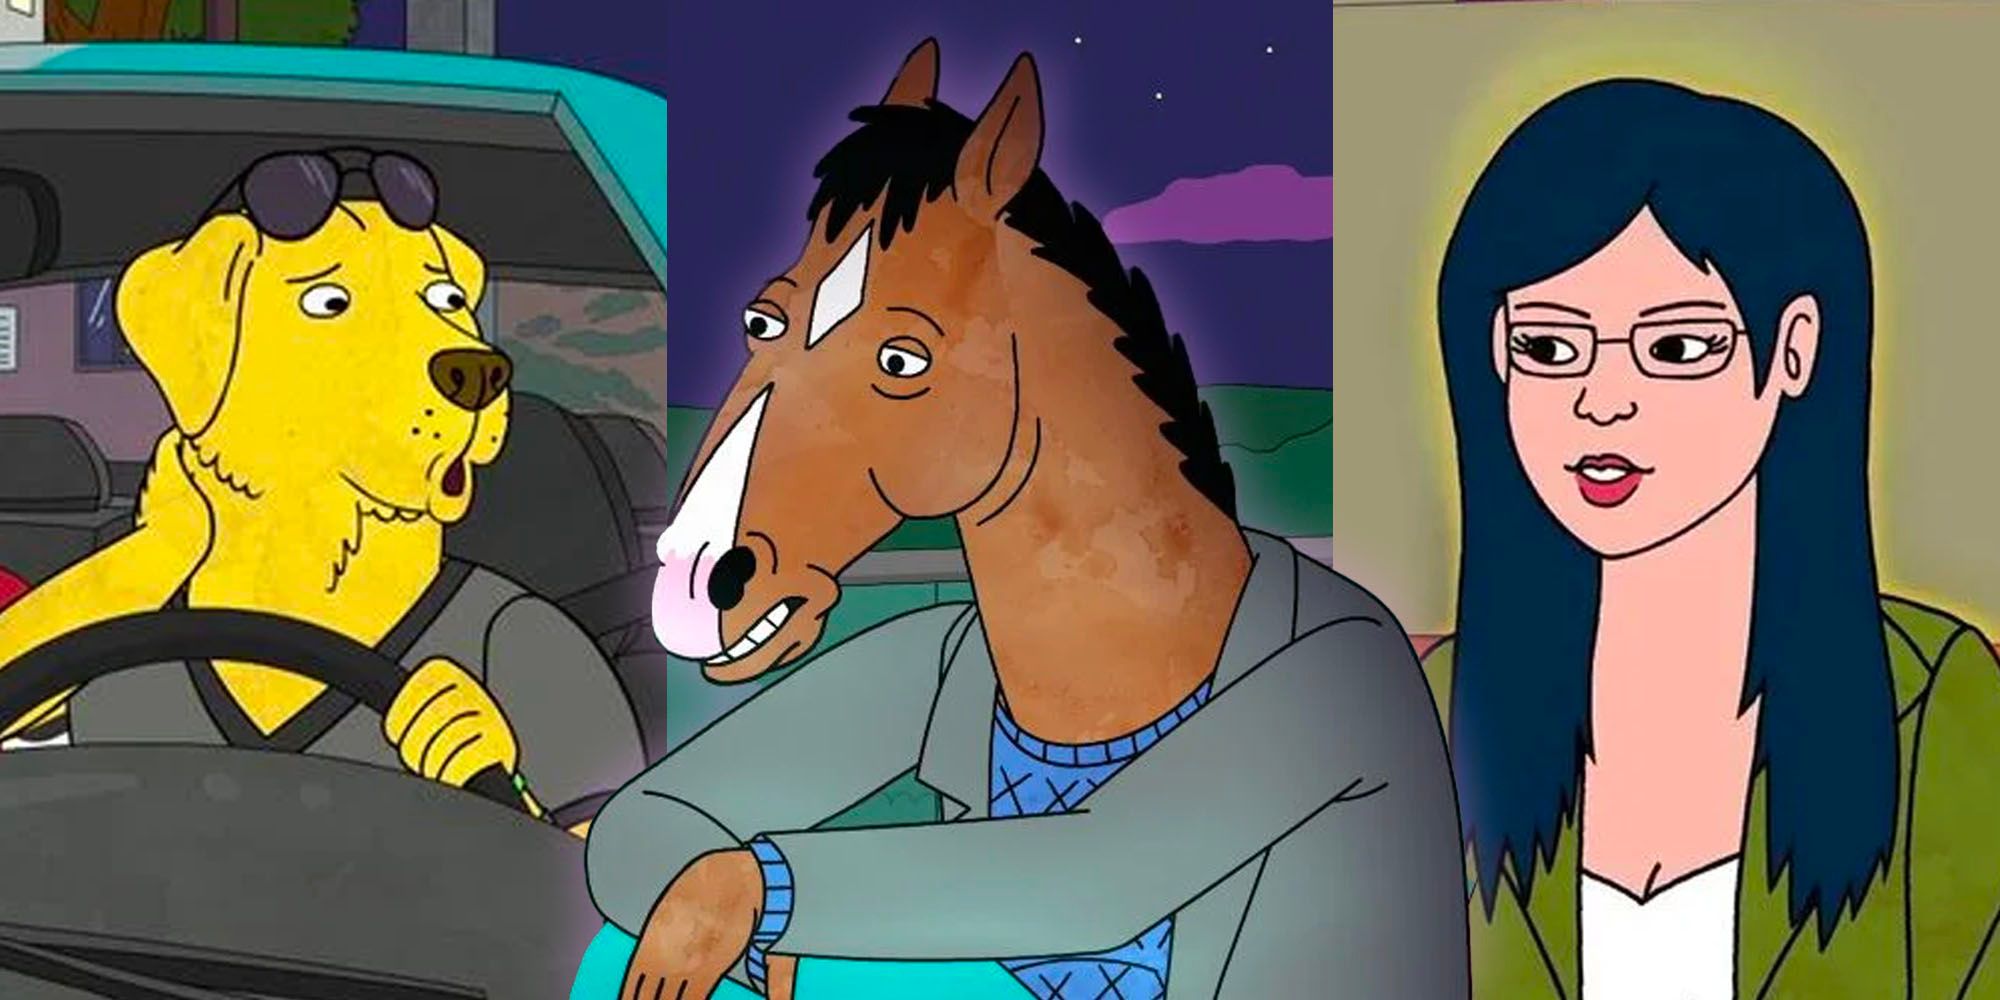 A collage of Mr Peanutbutter, BoJack and Diane from BoJack Horseman